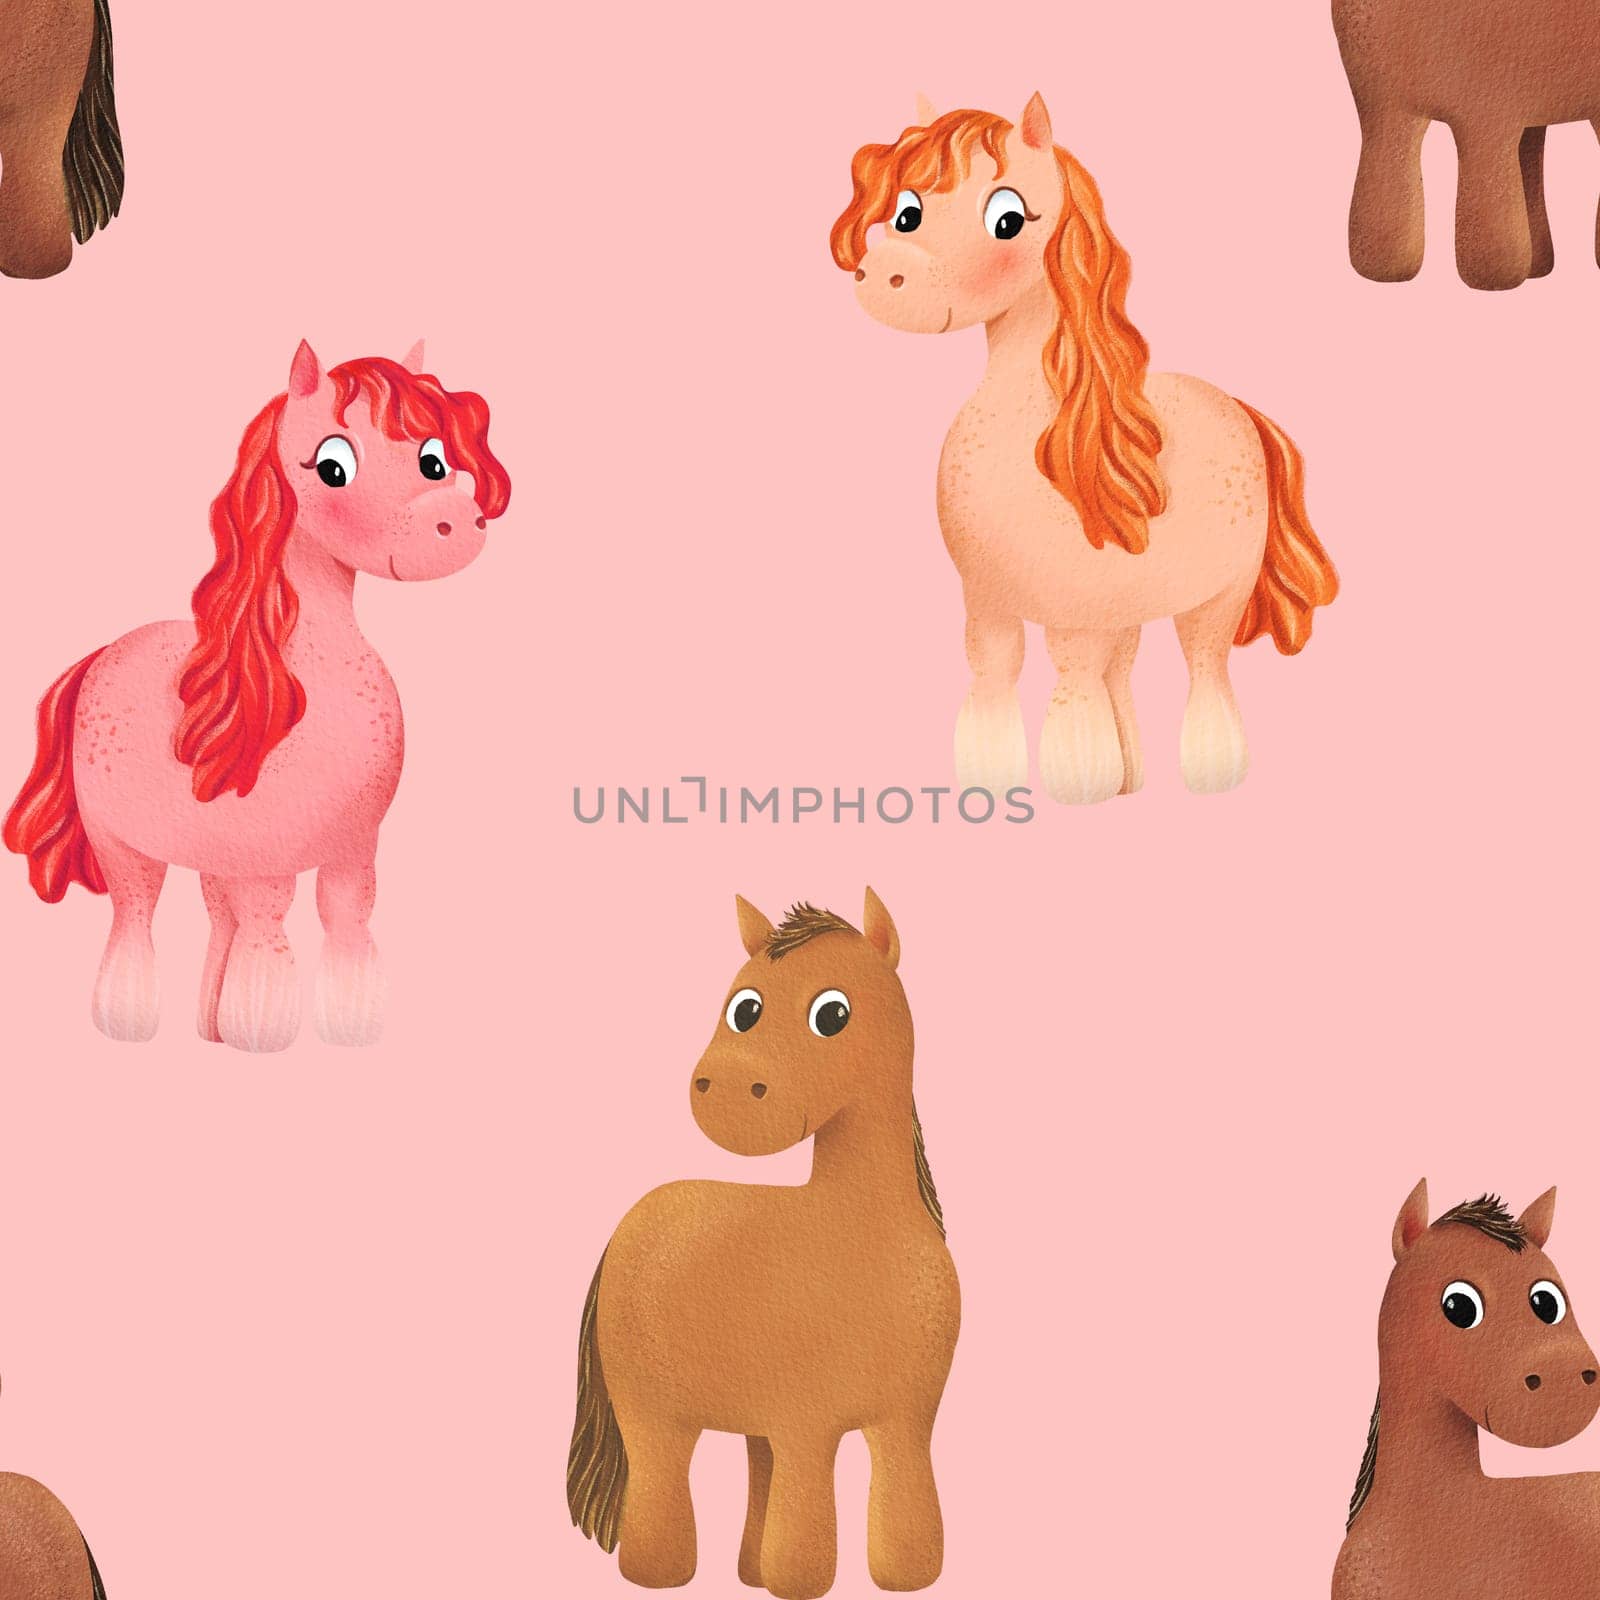 Seamless pattern of cute watercolor pony. Little horse. Funny animal for kid. Design for baby shirt design, nursery decor, card making, party invitations, logos, greeting cards, posters